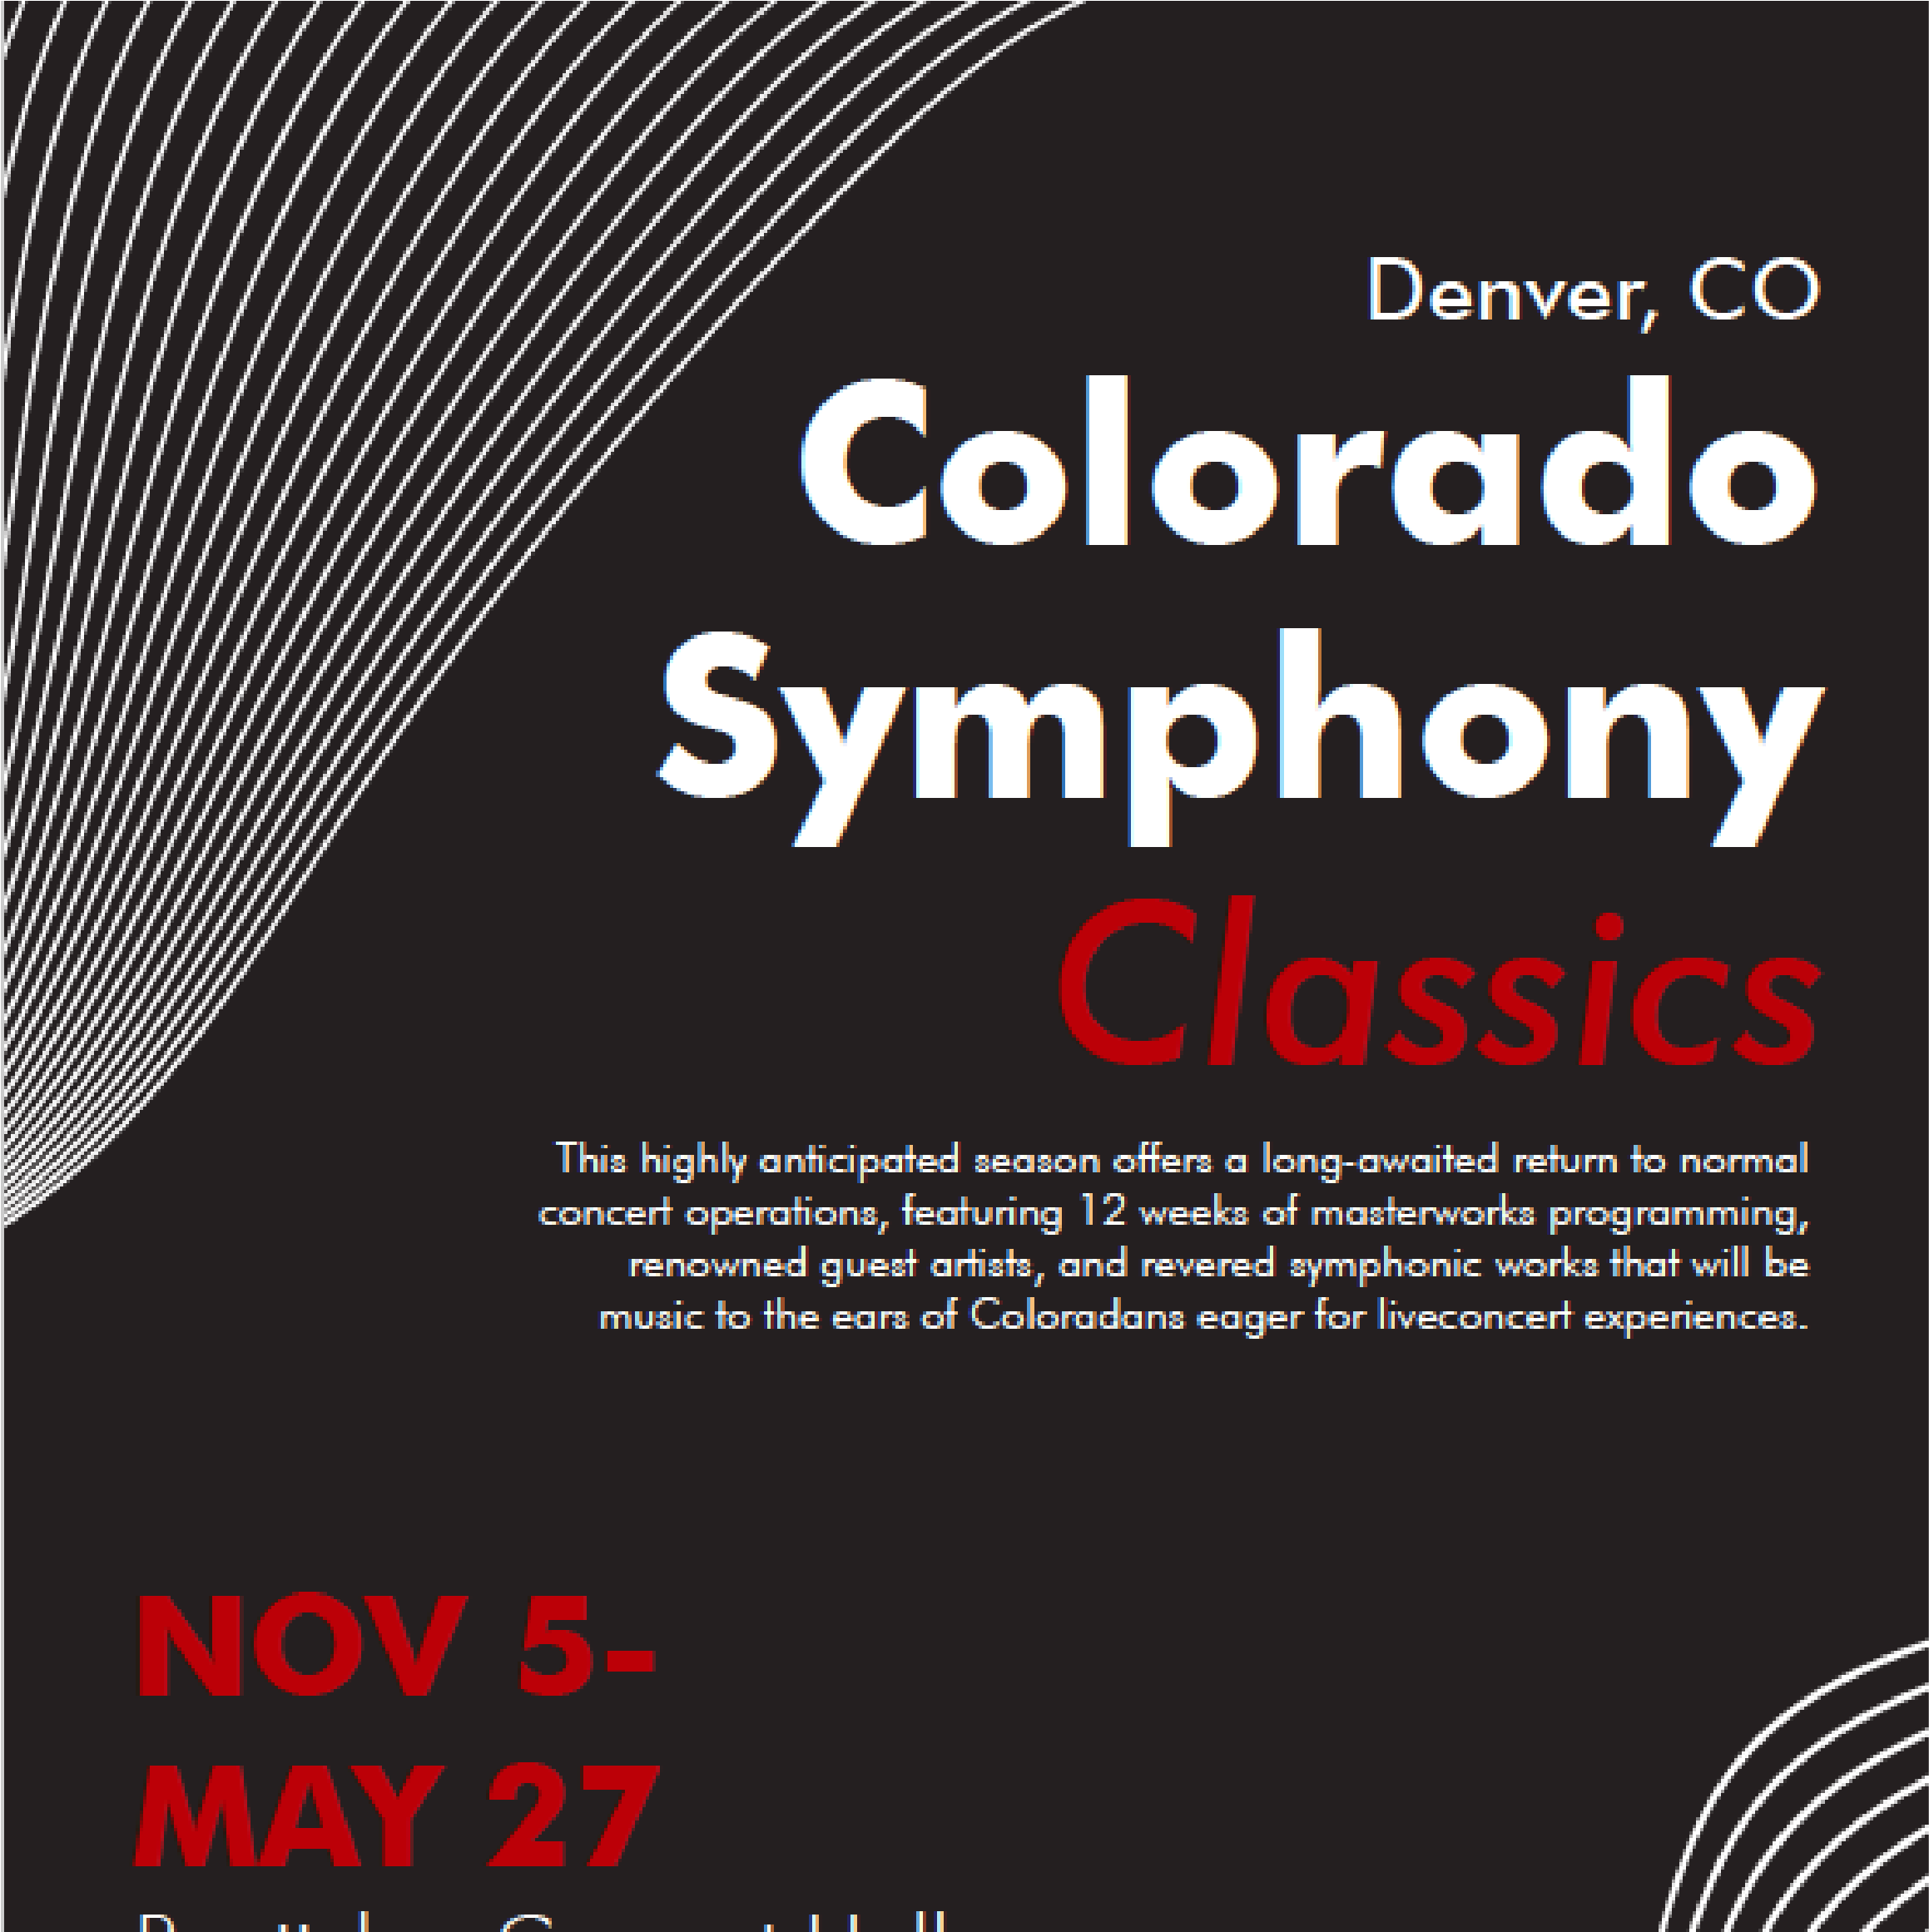 Link to a poster for the Colorado Symphony